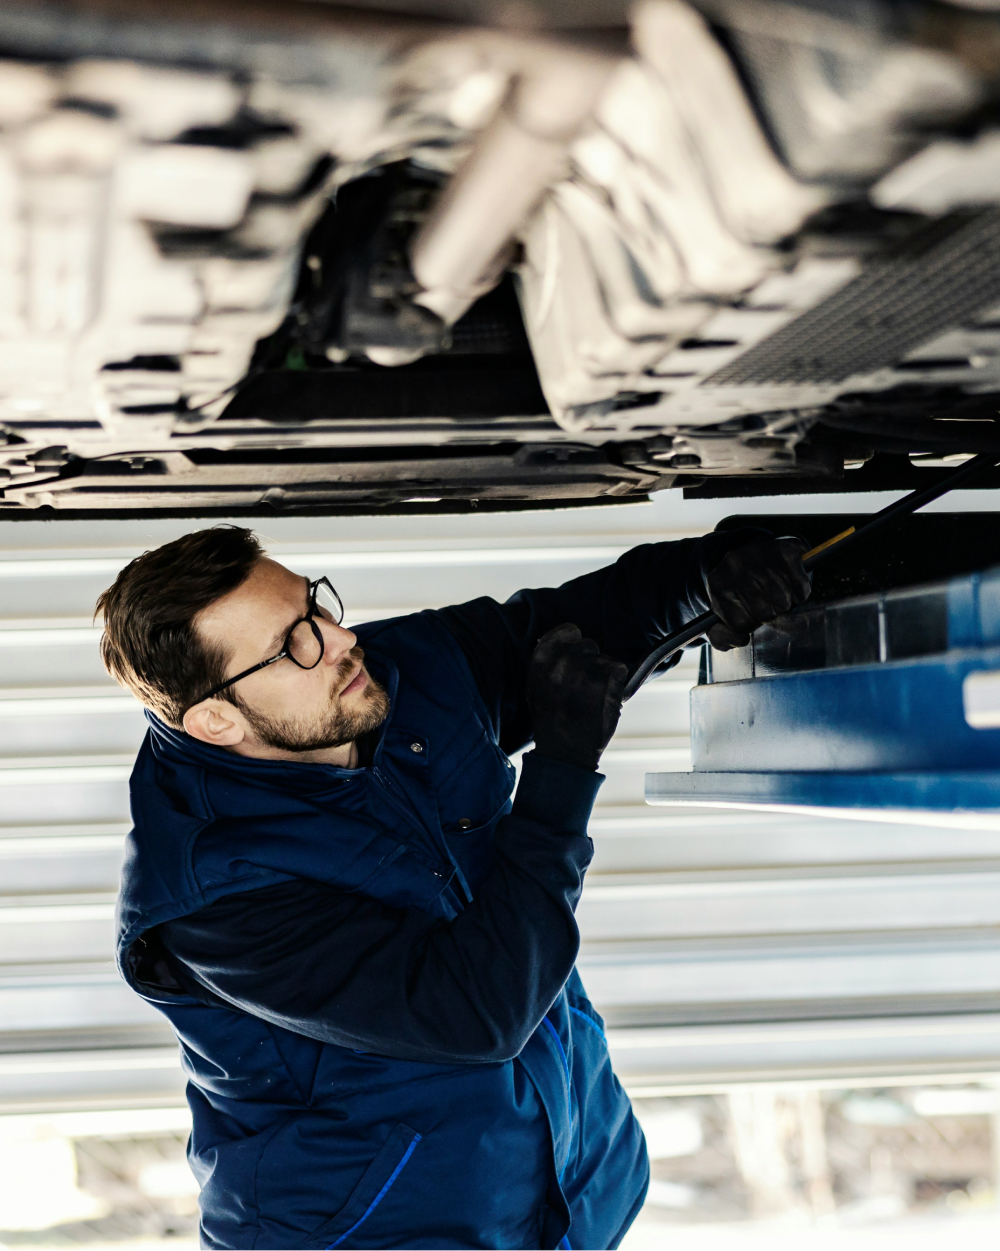 Upper body shot of a man working on the underside of a car.